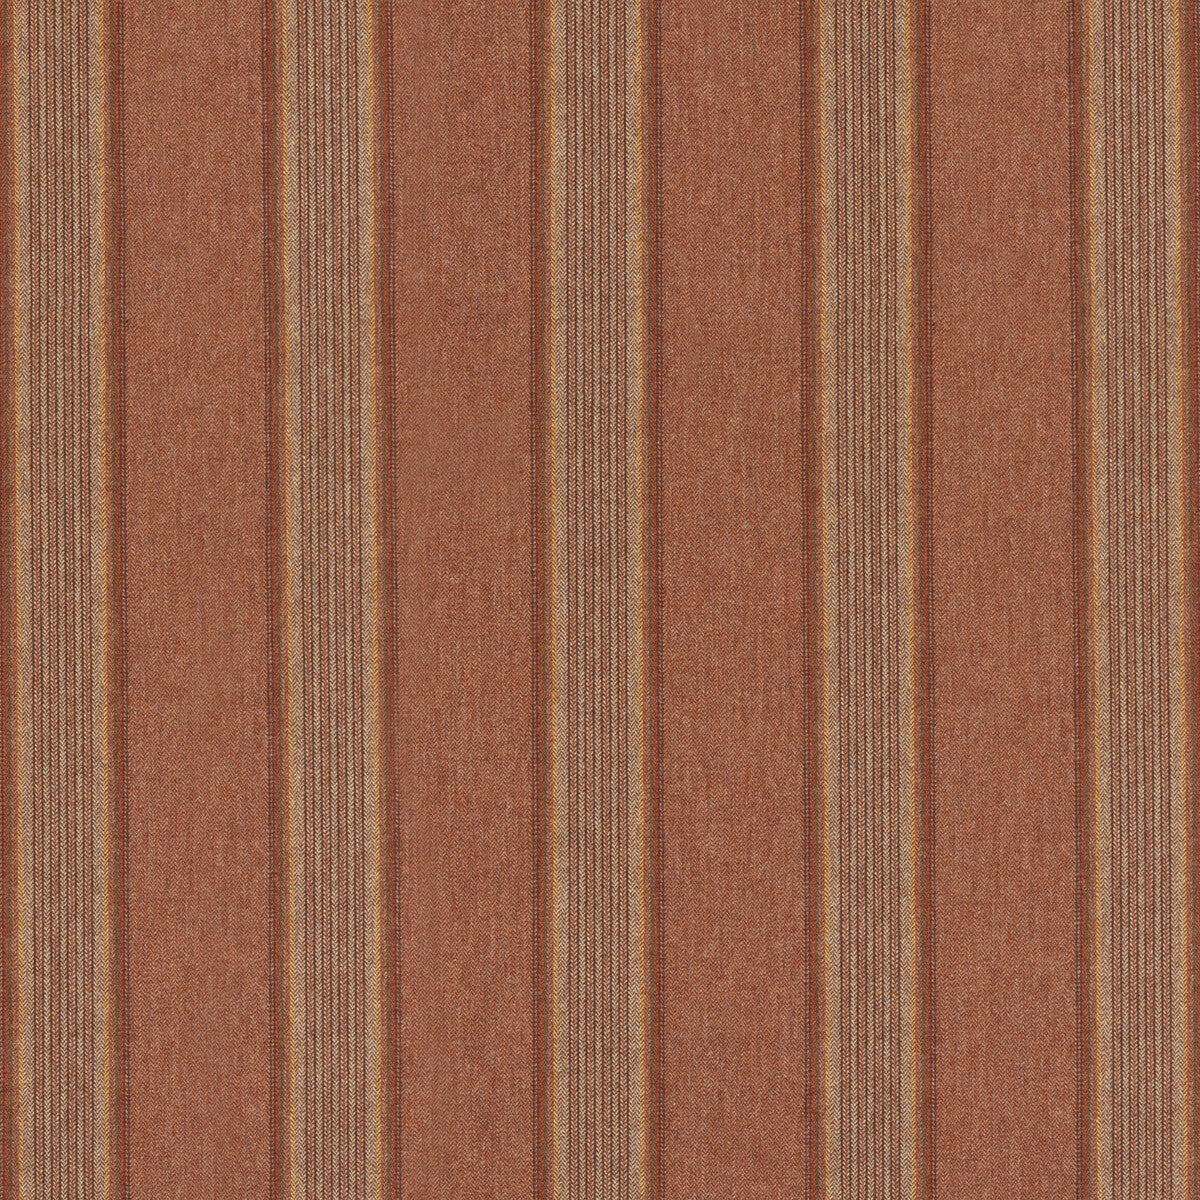 Moray Stripe fabric in russet color - pattern FD808.V55.0 - by Mulberry in the Mulberry Wools IV collection